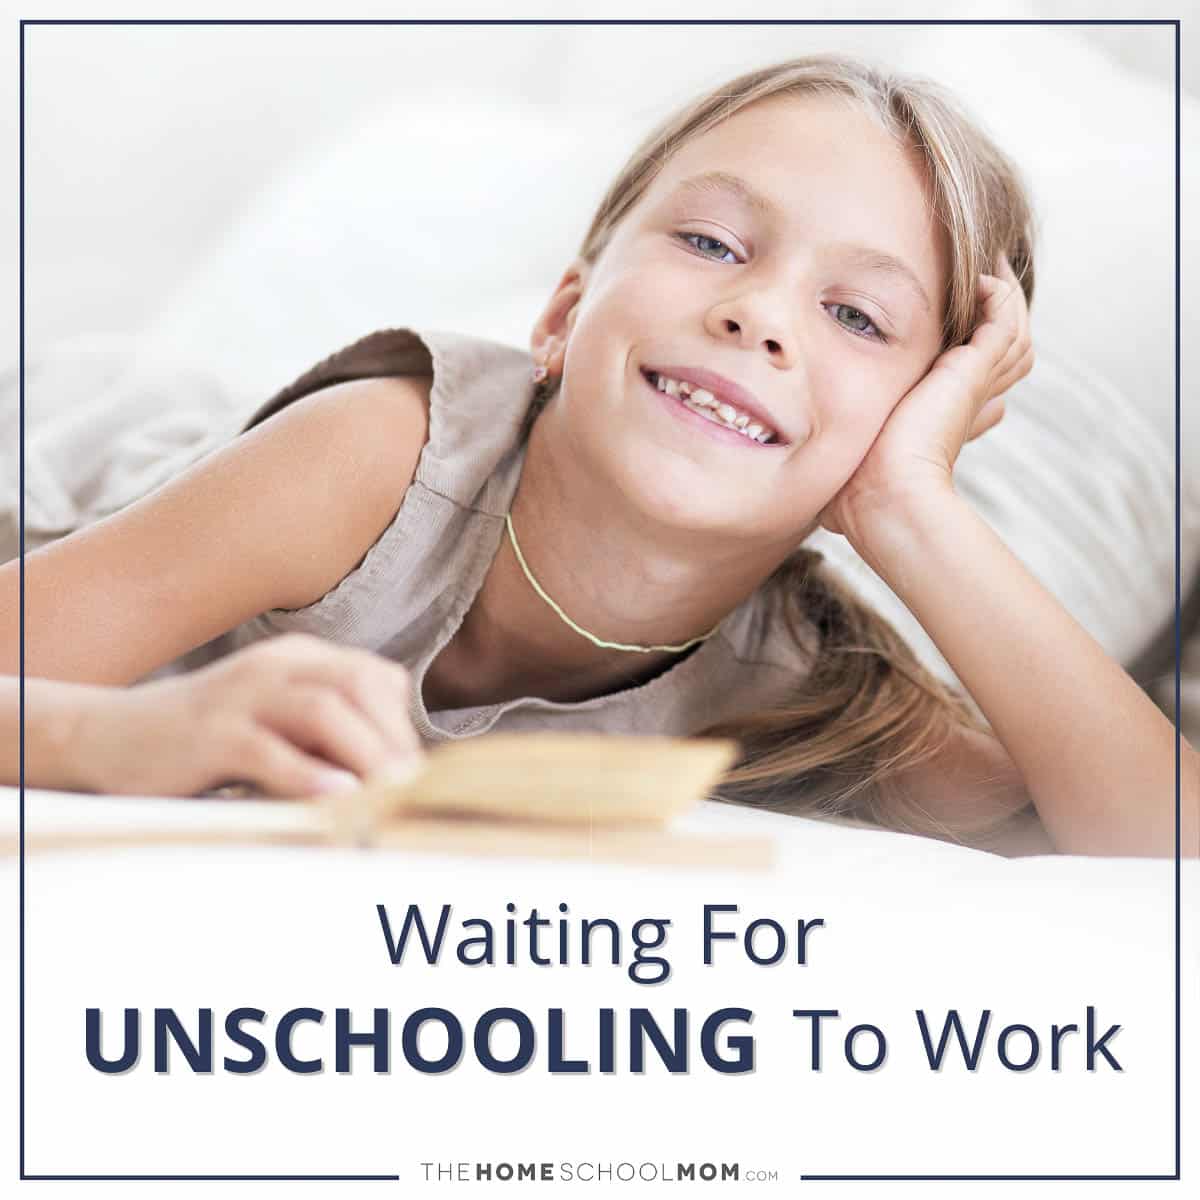 Waiting for unschooling to work.